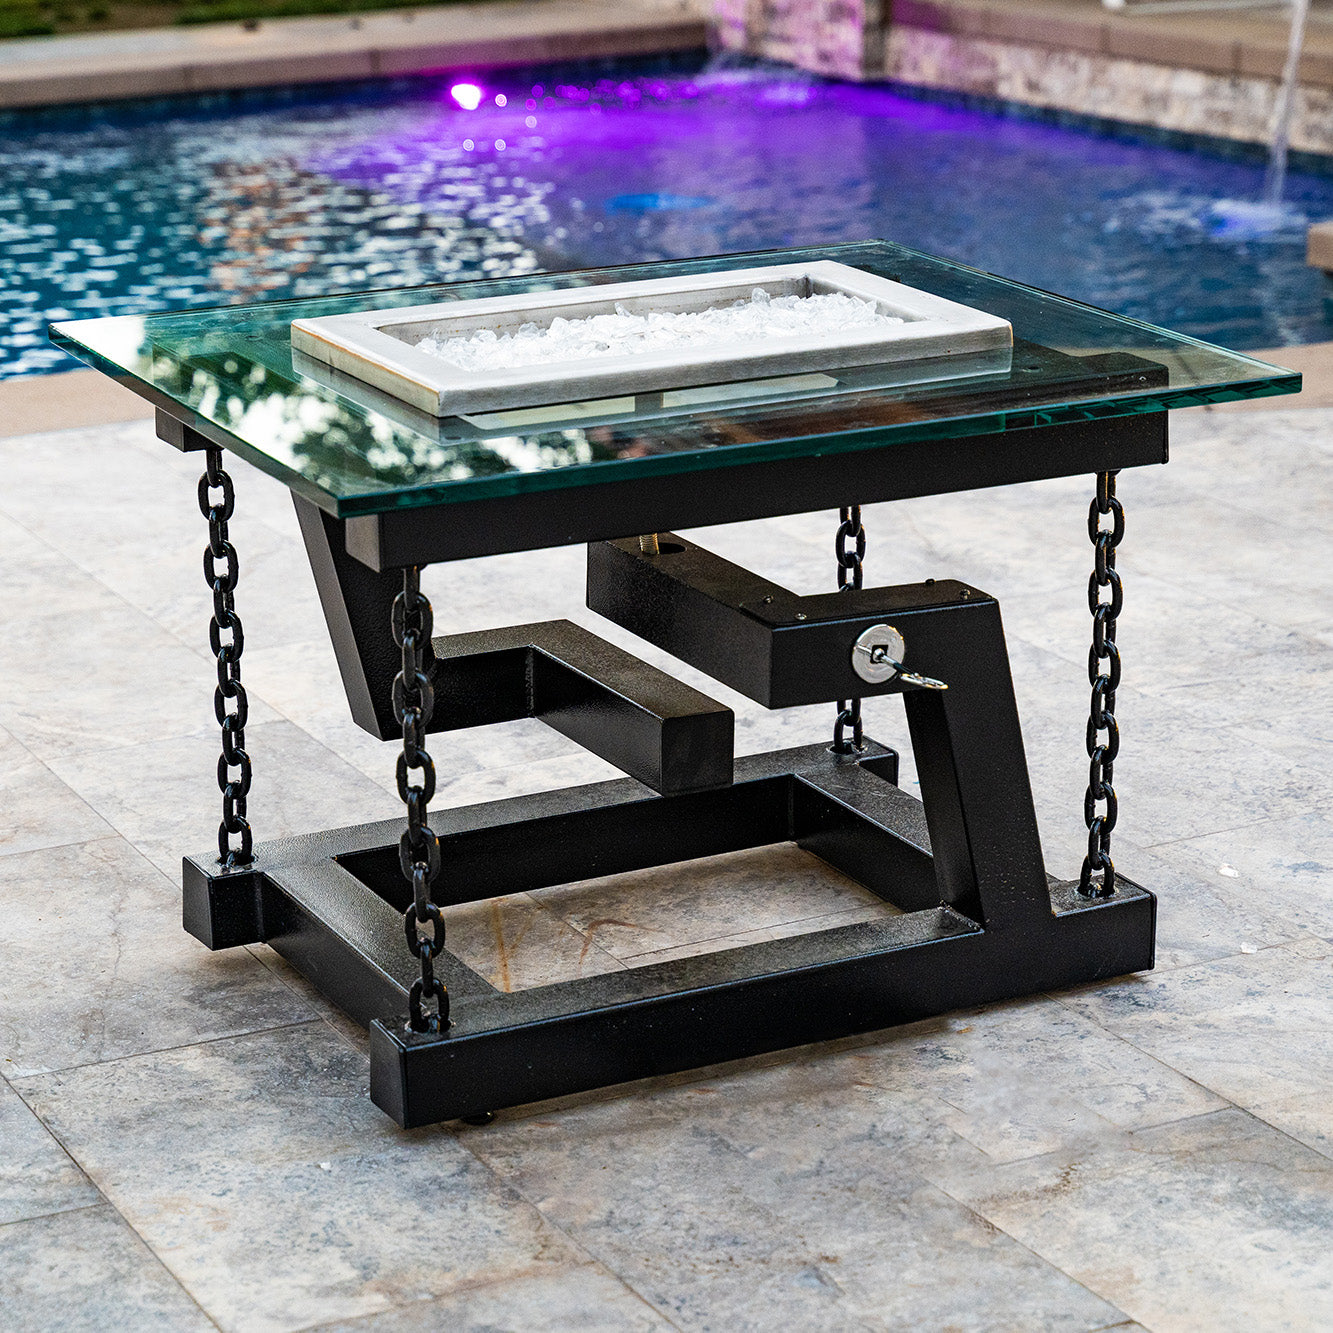 The Outdoor Plus Newton Powder Coated Fire Pit – Chain Support